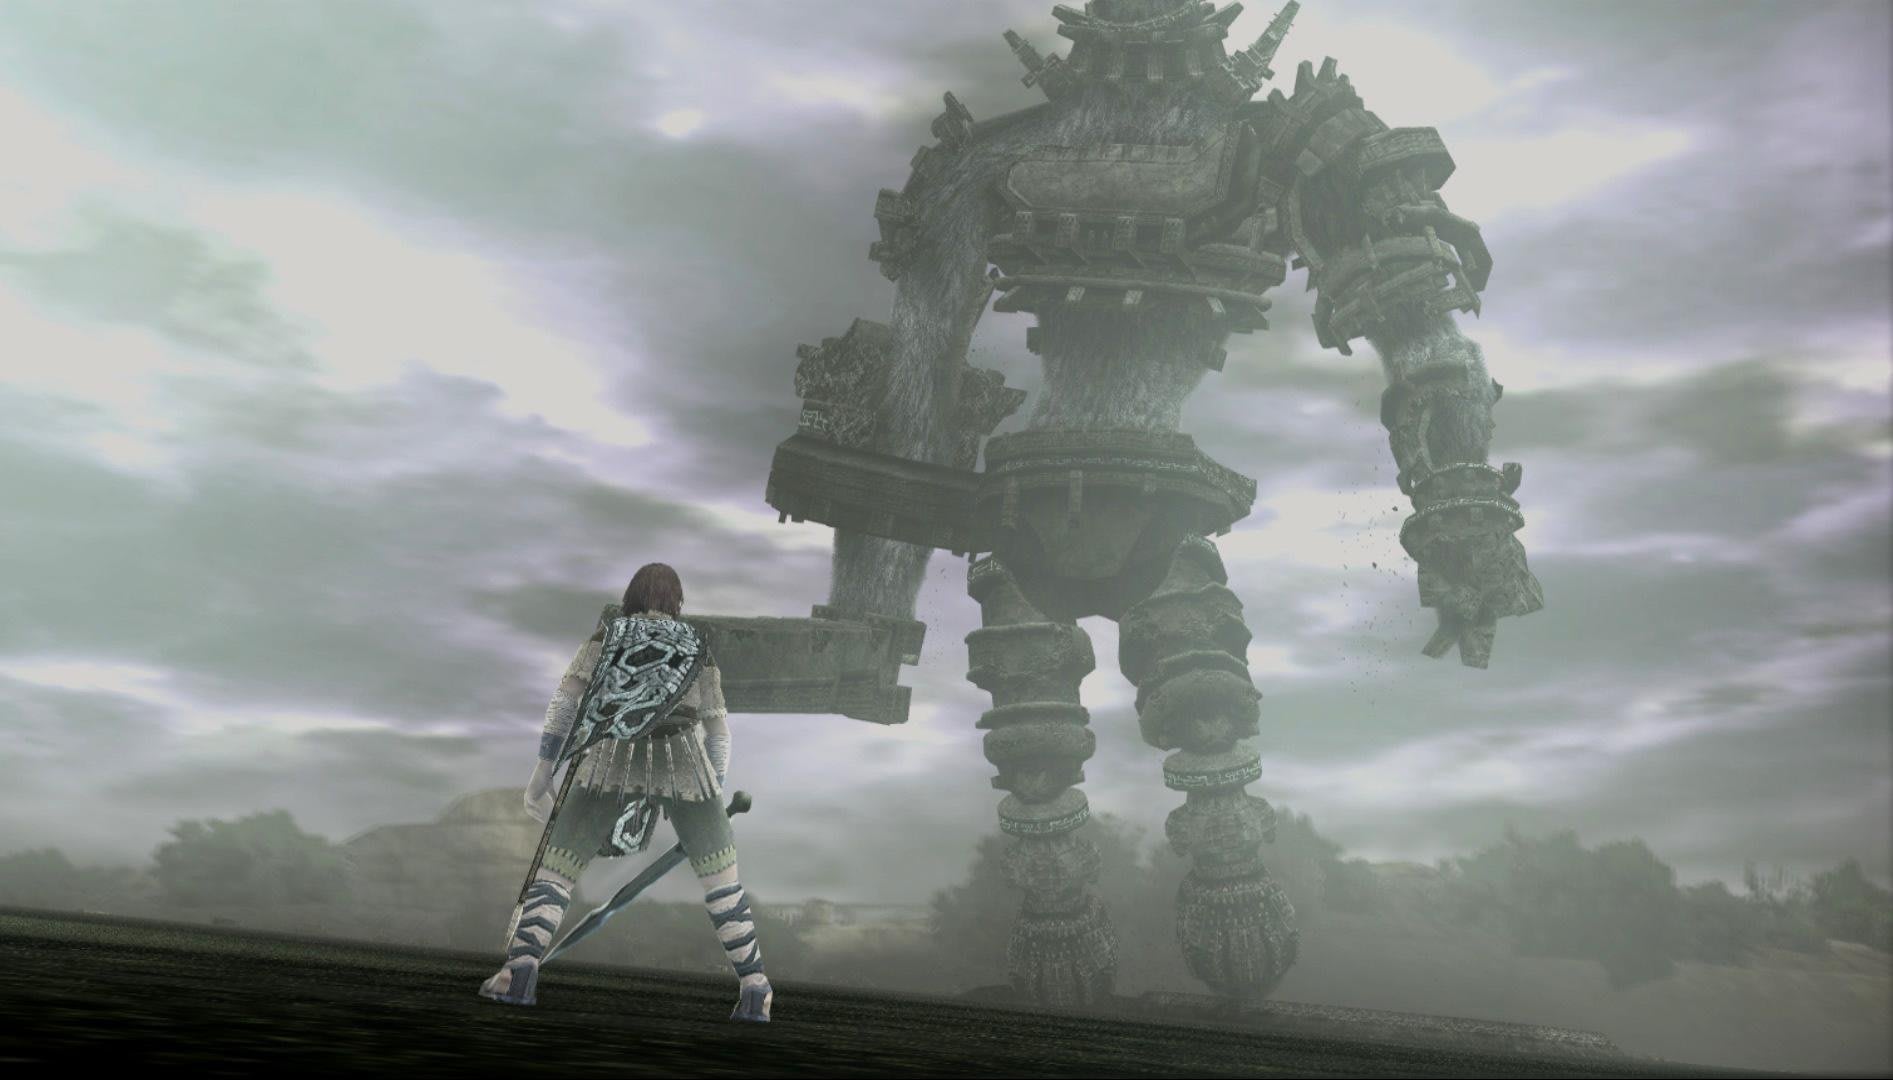 Shadow of the Colossus™